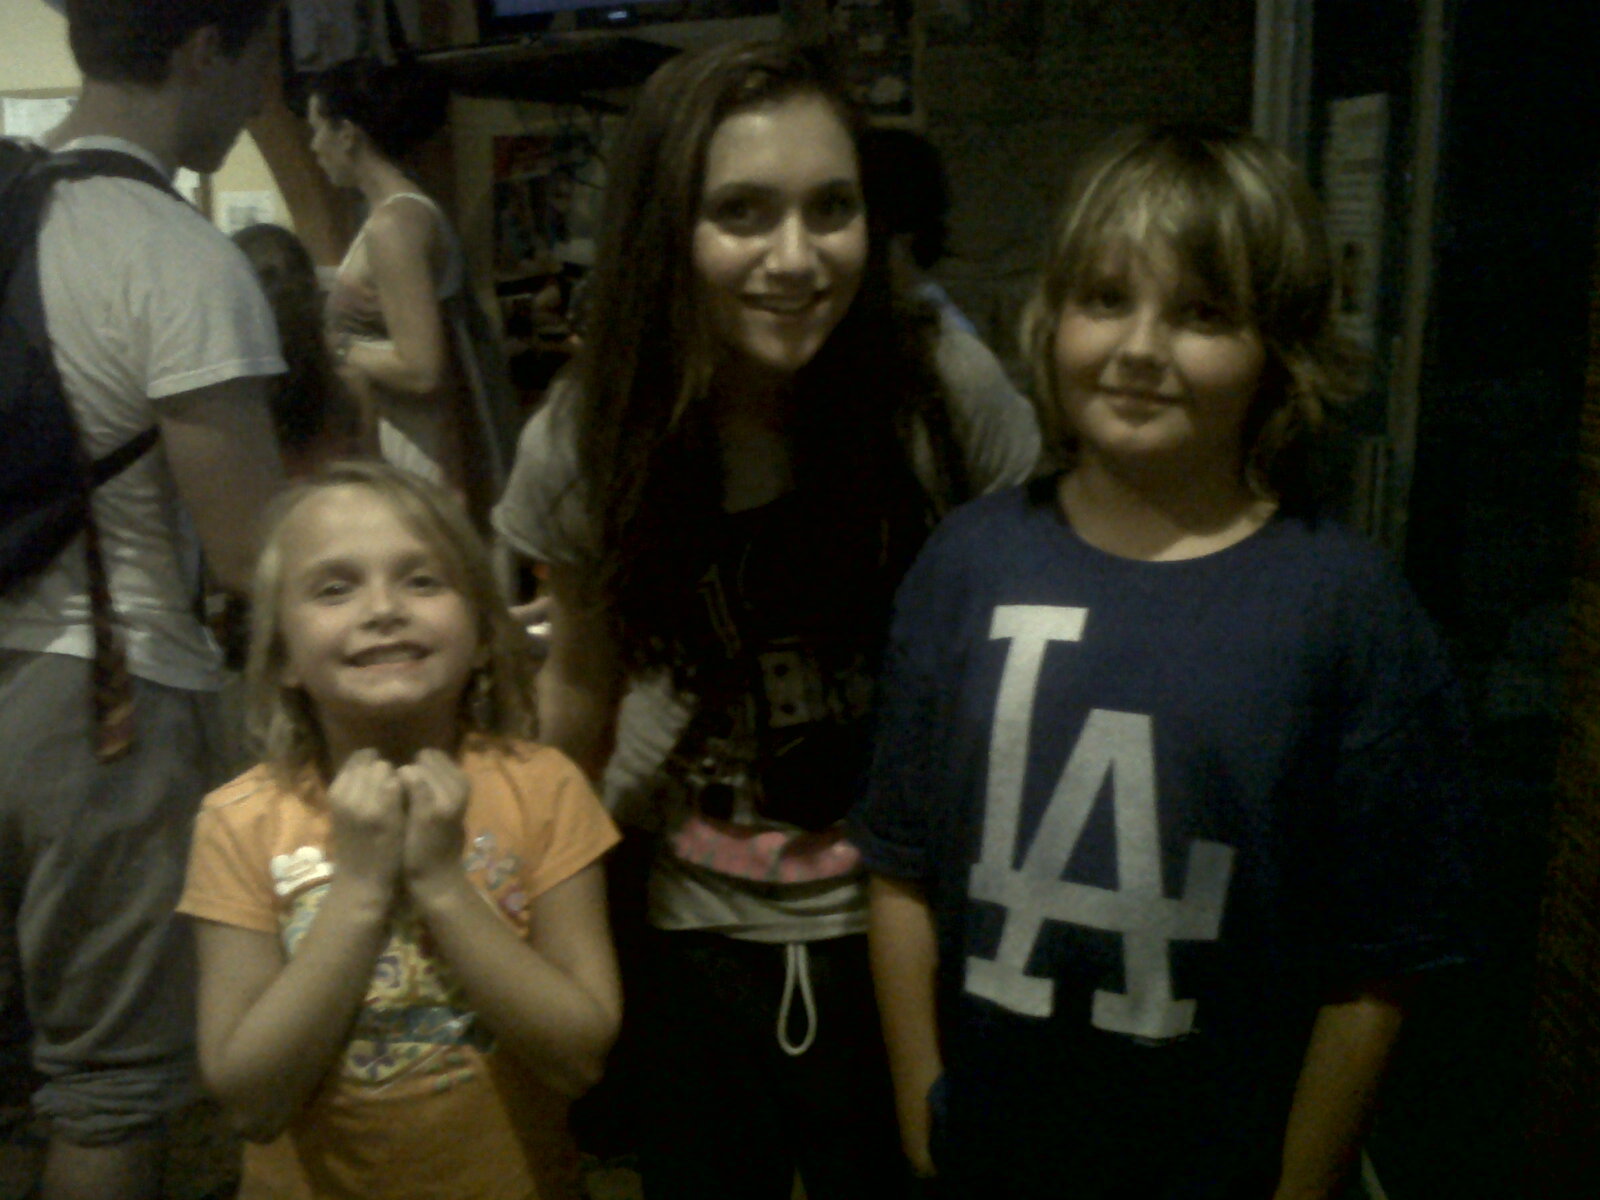 Craig with Alyson Stoner and Reagan Shippey